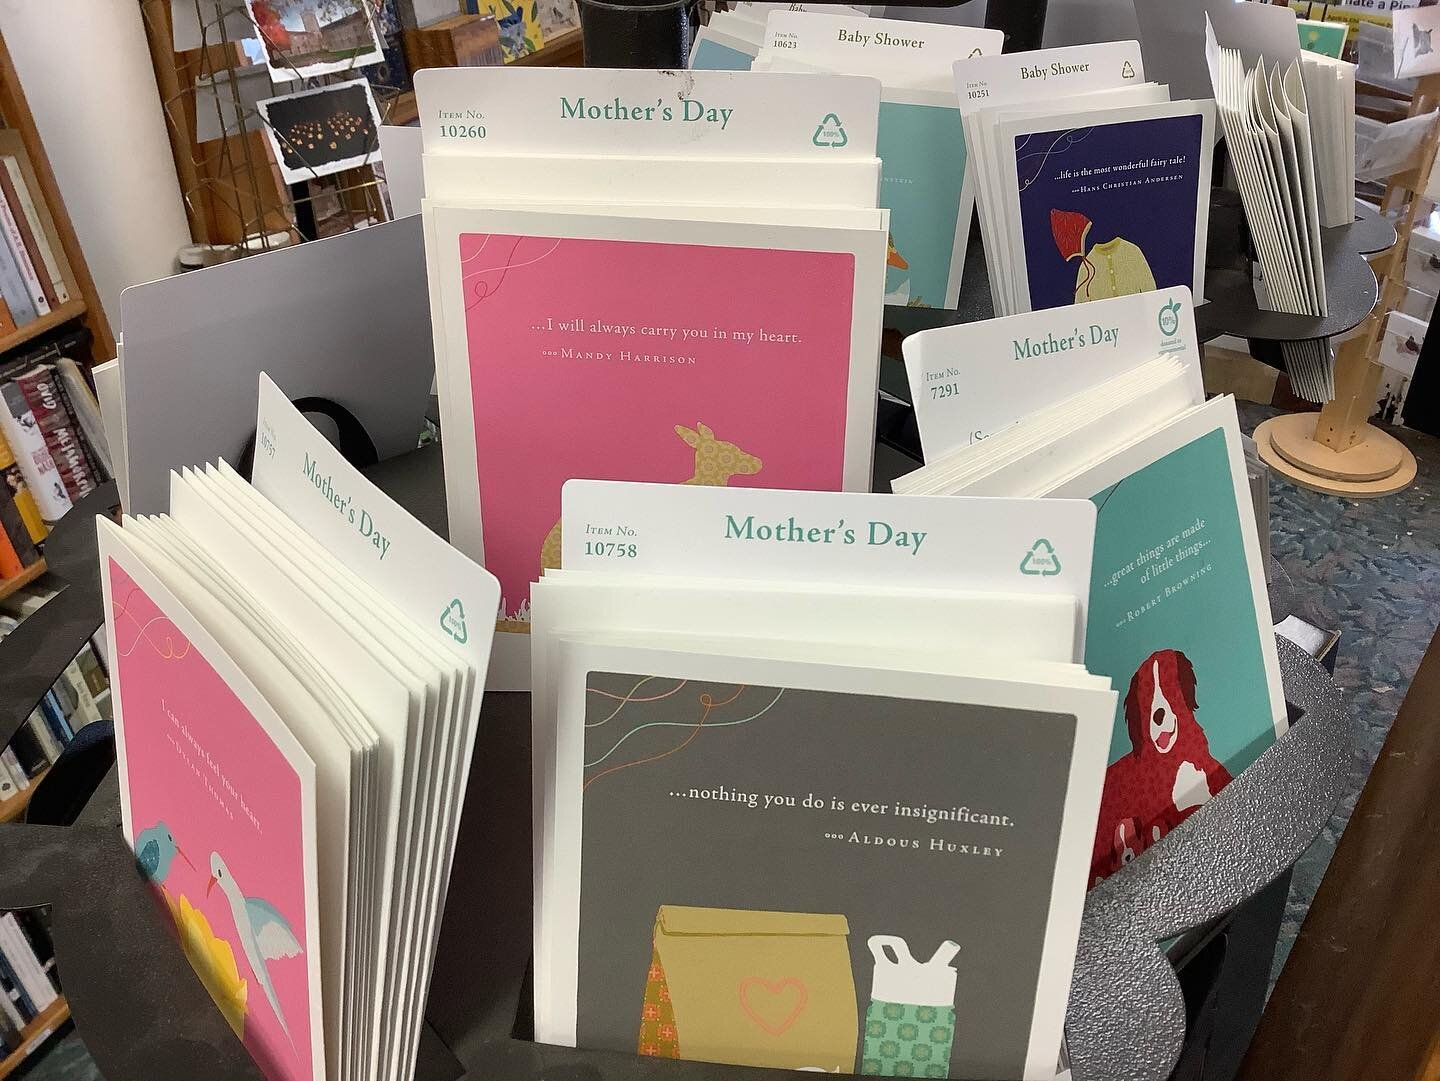 Mother&rsquo;s Day this Sunday!  You knew that, right?  I have #compendium cards directly on message and many blank floral cards perfect for the day.  It&rsquo;s for your own good, trust me.  #whistlestopbookshop #lovecarlislepa #cumberlandvalleypa